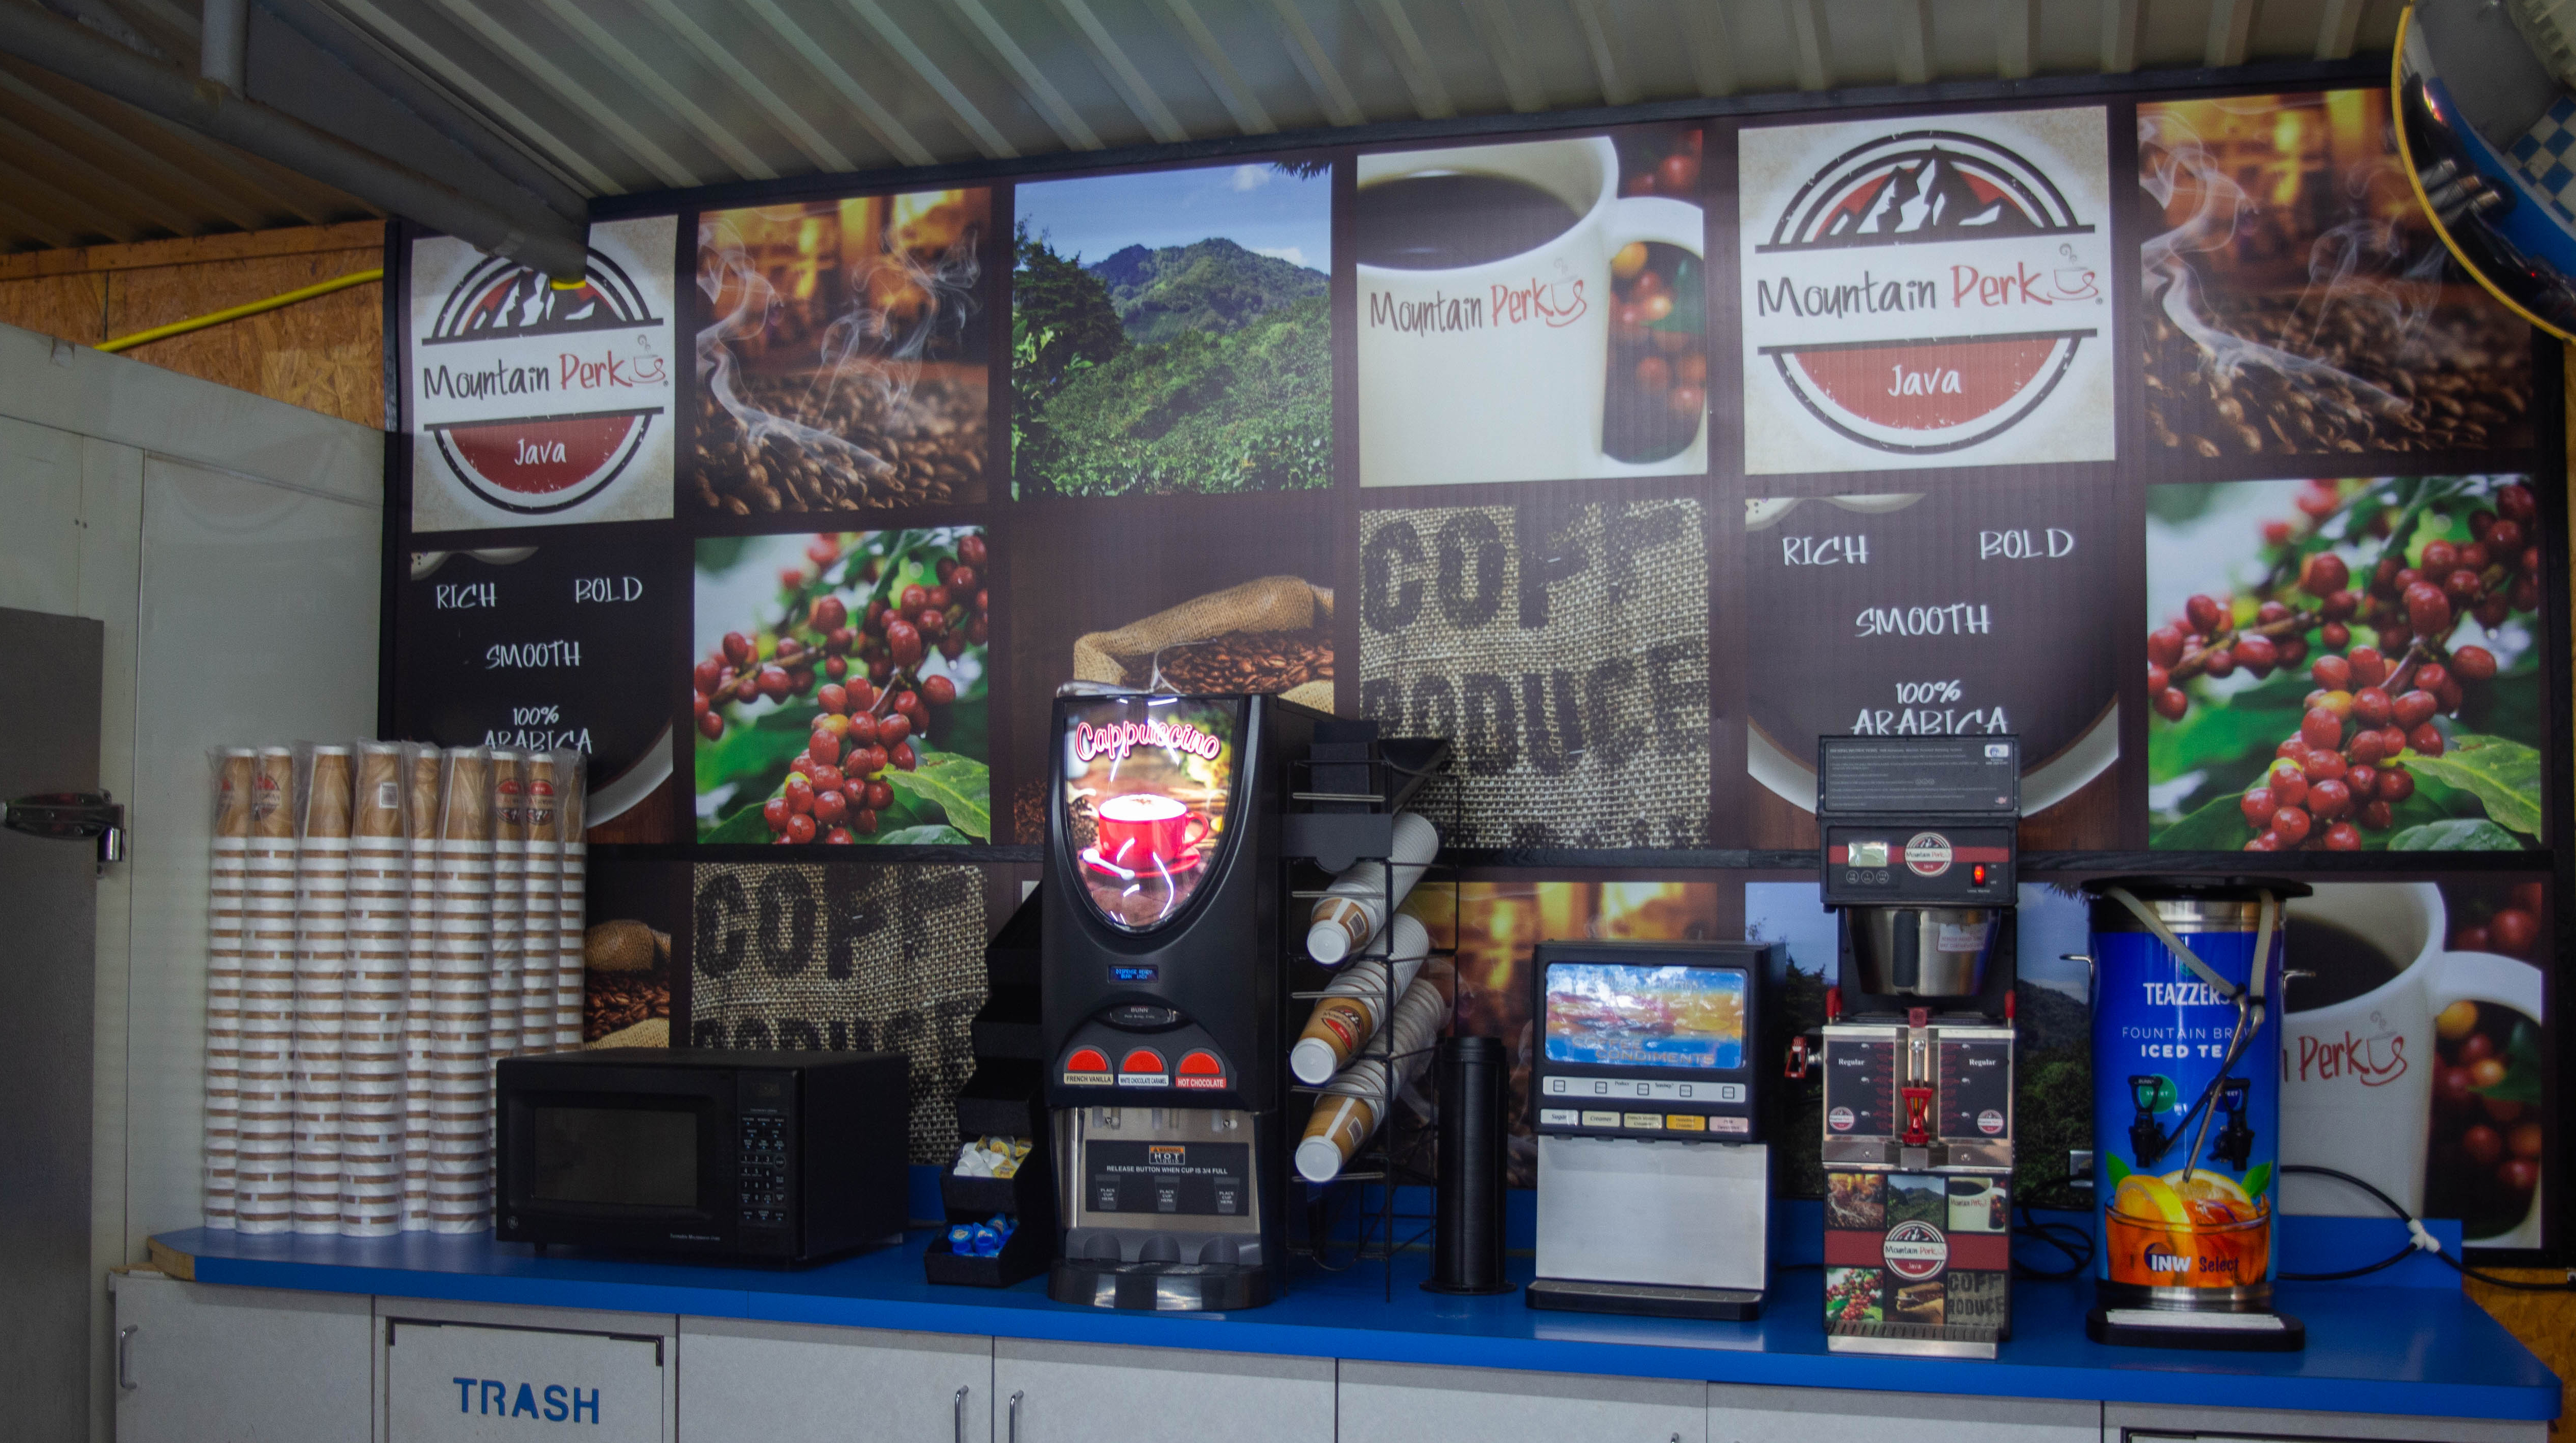 Cordell Plaza has a large selection of coffee and other beverages available. PHOTO BY HECTOR LUCAS